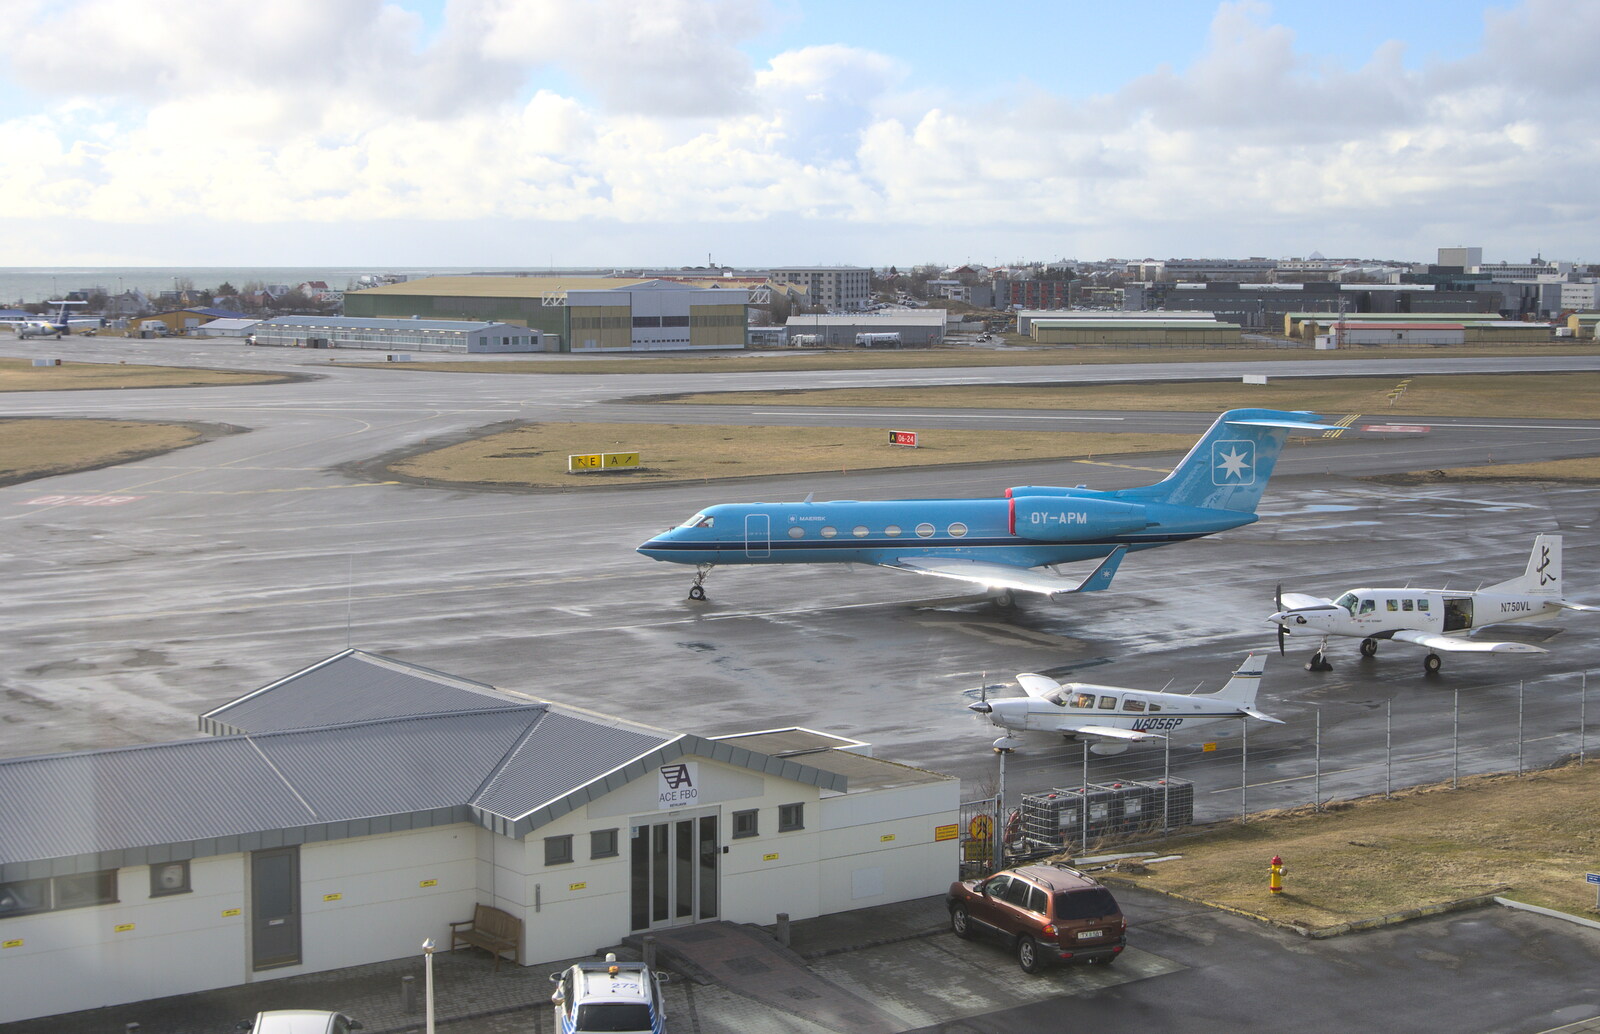 There's a regional airport behind the hotel from A Trip to Reykjavik, Iceland - 20th April 2017